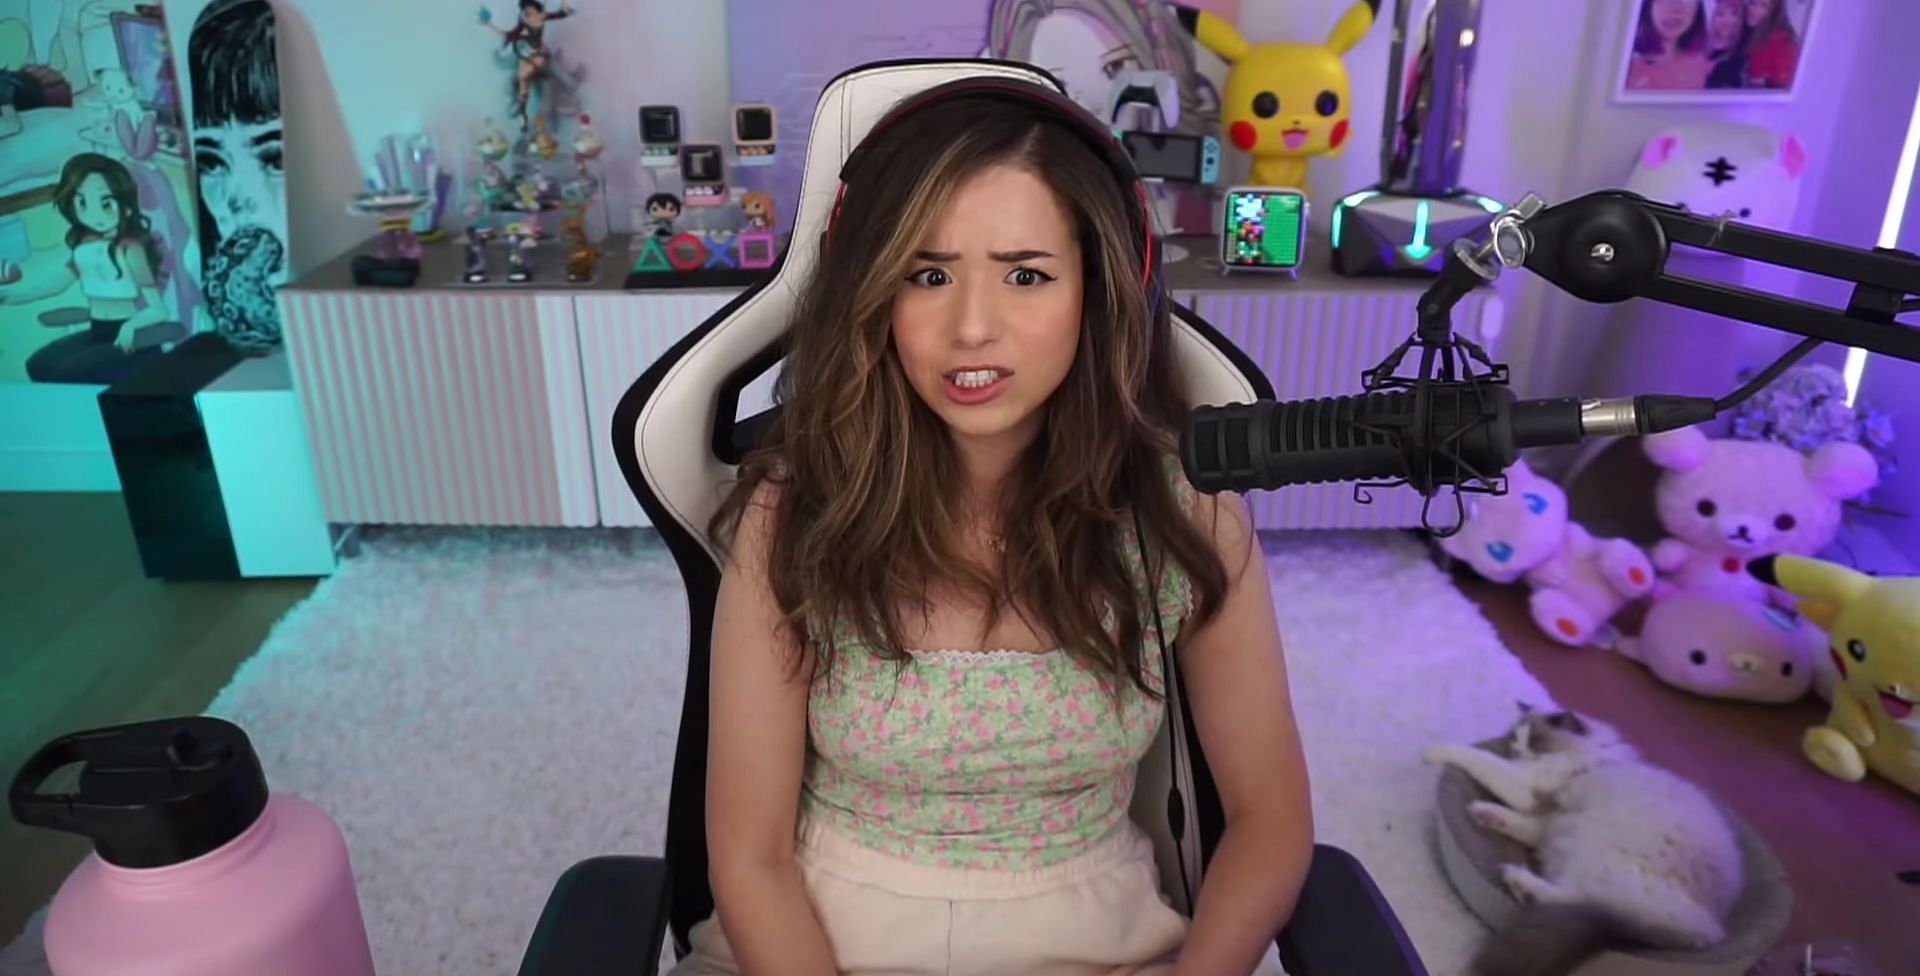 Pokimane recounts her recent experience of being stalked by an older man (Image via Pokimane Too on YouTube)